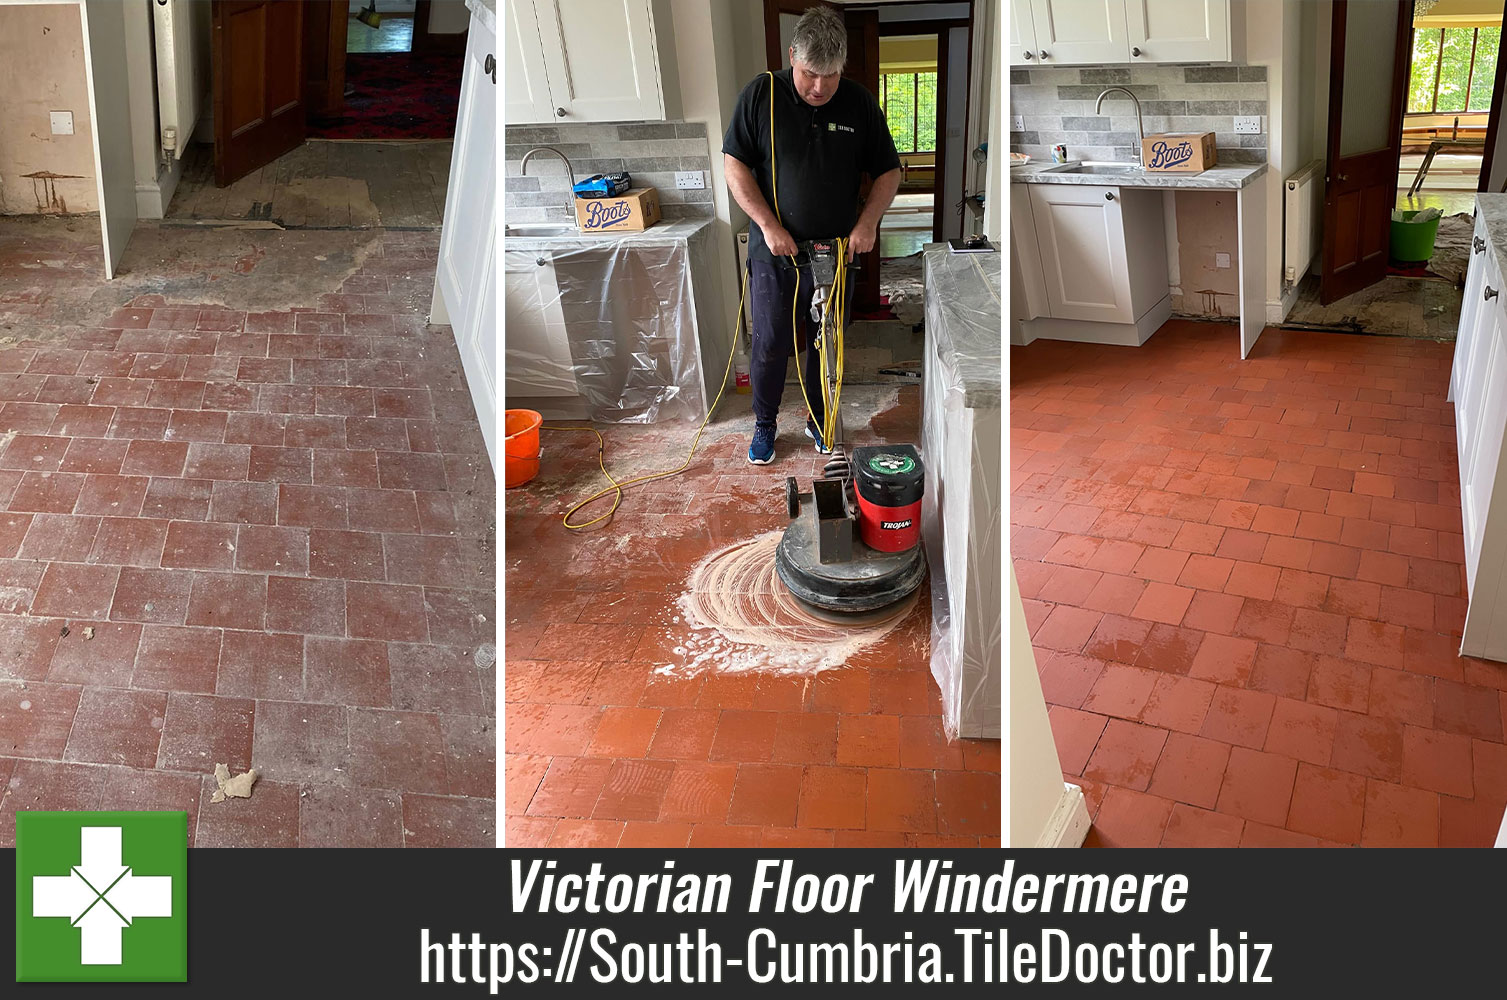 Using Gel Cleaning Products to remove Glue and Paint from a Victorian Floor in the Lake District